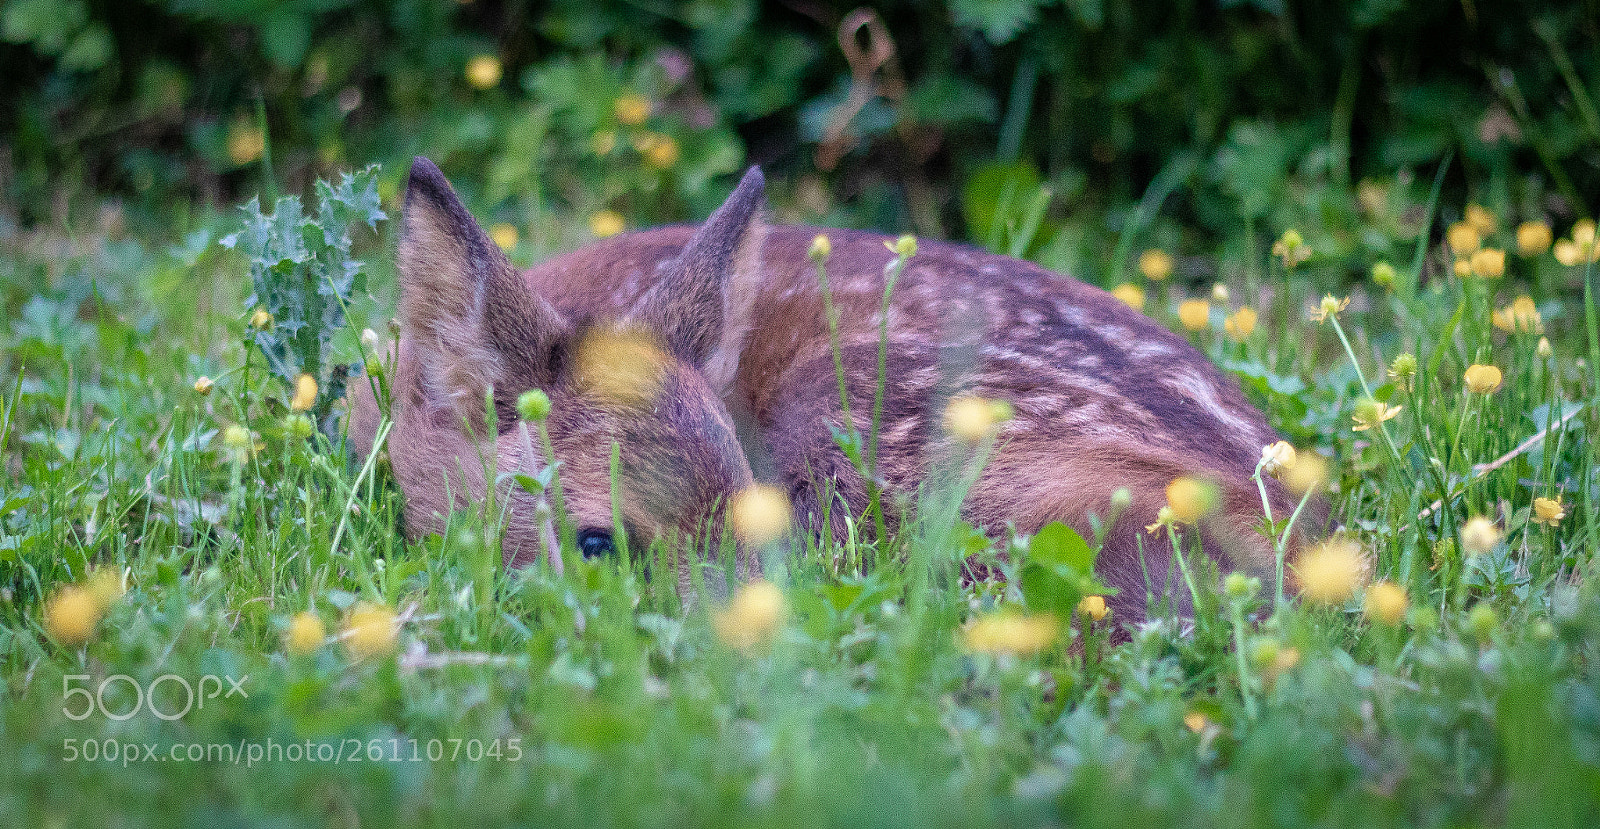 Sony a6300 sample photo. Deer fawn waiting for photography